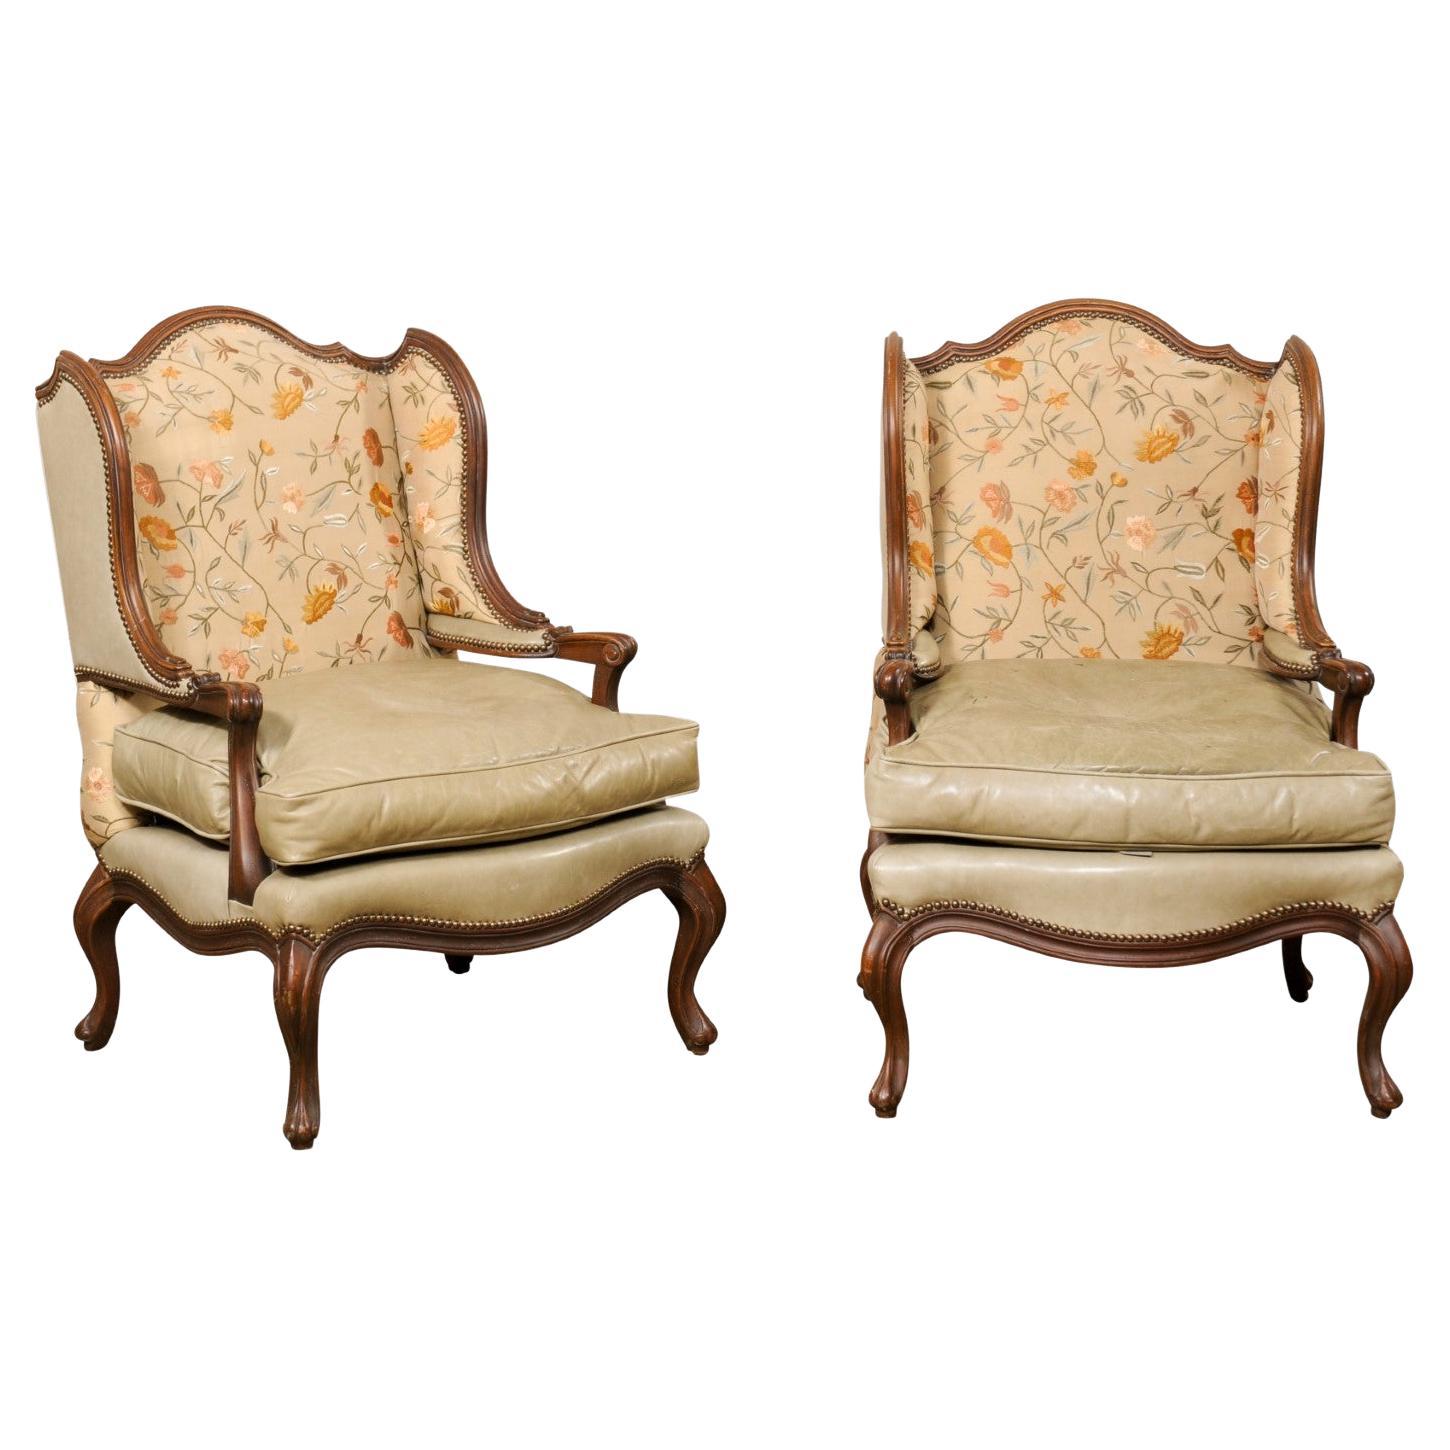 Pair Nicely-Sized Carved Wood & Upholstered Wing-Back Chairs, Mid 20th C For Sale